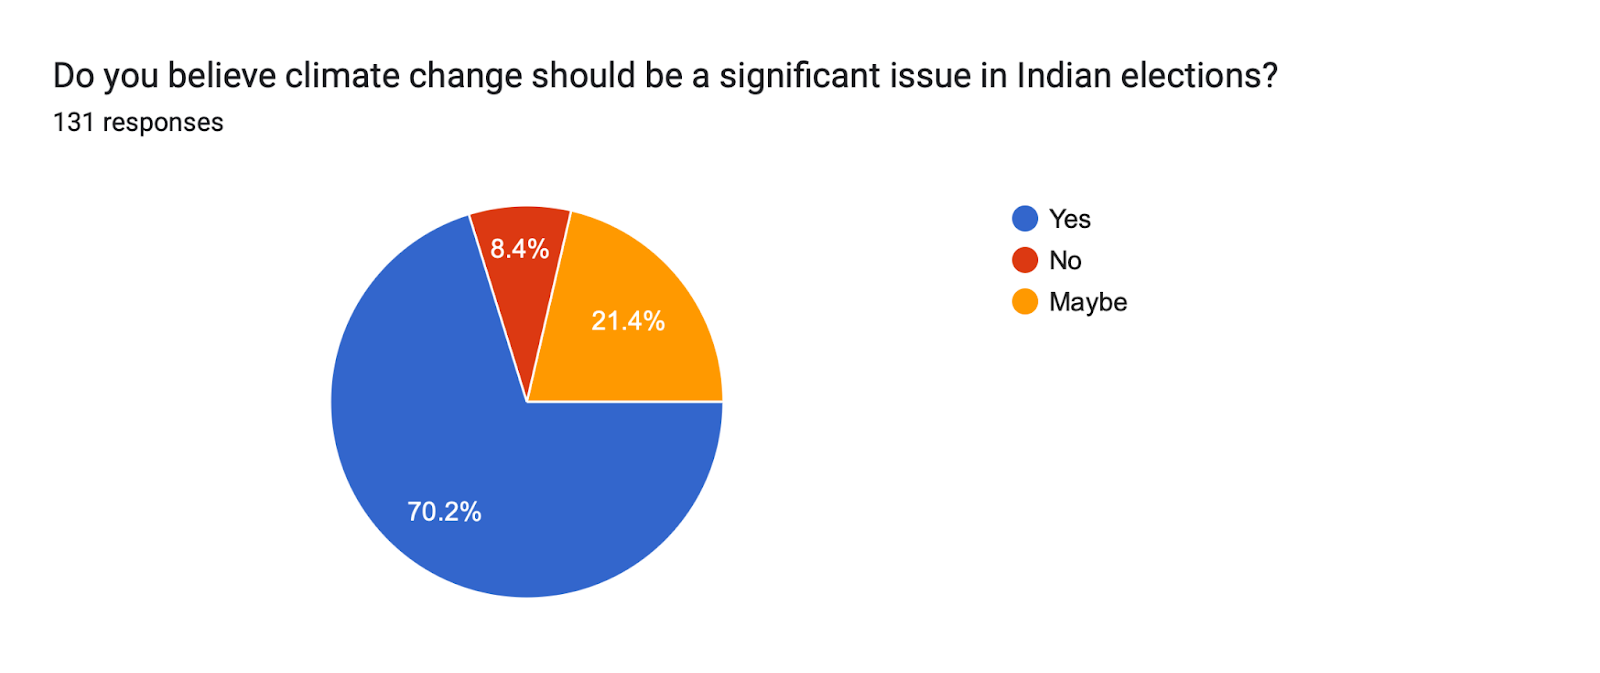 Forms response chart. Question title: Do you believe climate change should be a significant issue in Indian elections?. Number of responses: 131 responses.